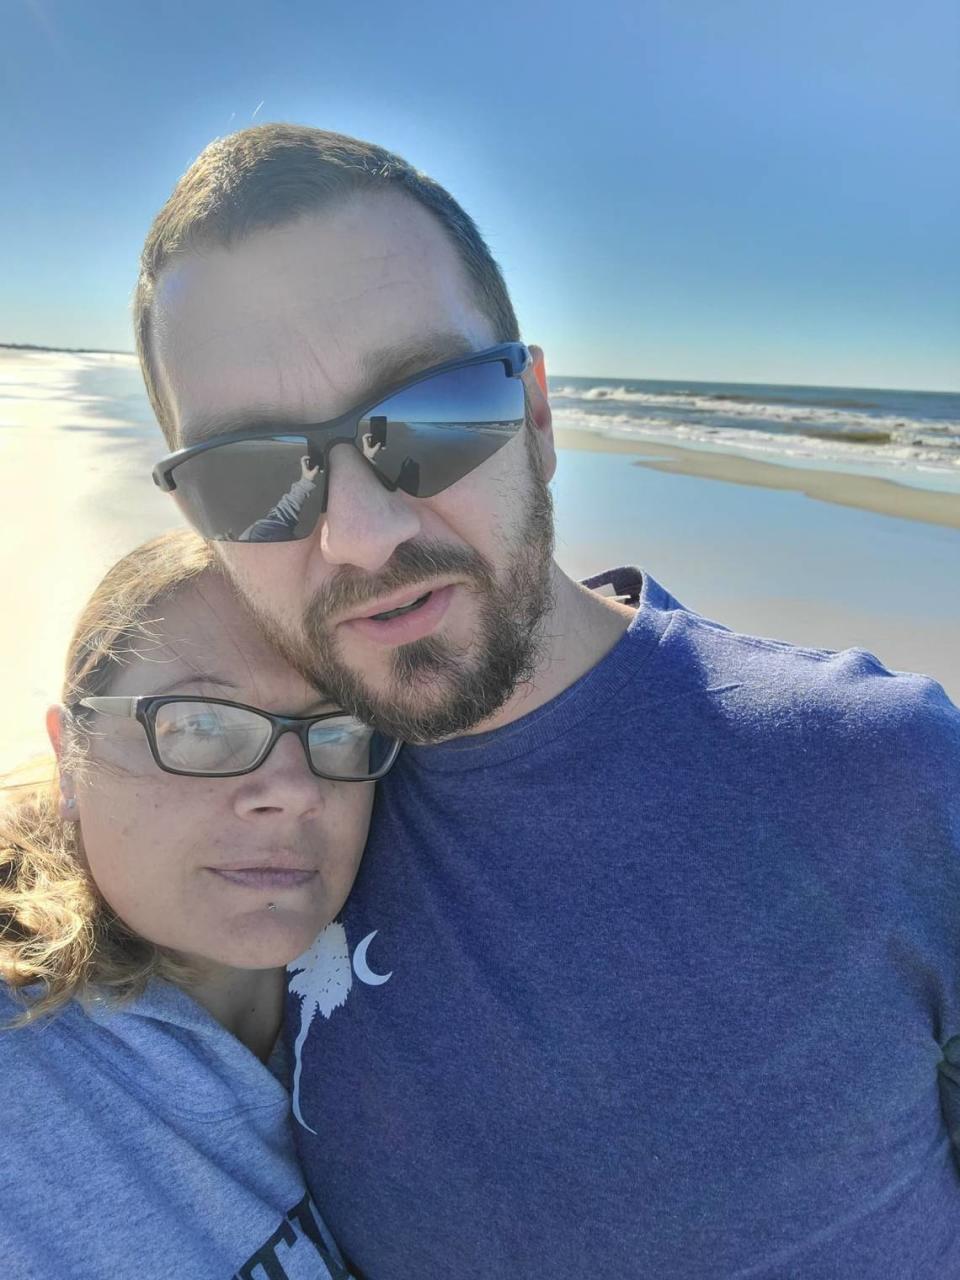 Jaymie Hinds, left, met Jeff Rusnock nearly 10 years ago at a casino in Montana. They lost touch, but ran into one another again during the pandemic last summer. The pair have spent nearly every day together since and moved to Myrtle Beach in October to be closer to Rusnock’s family.